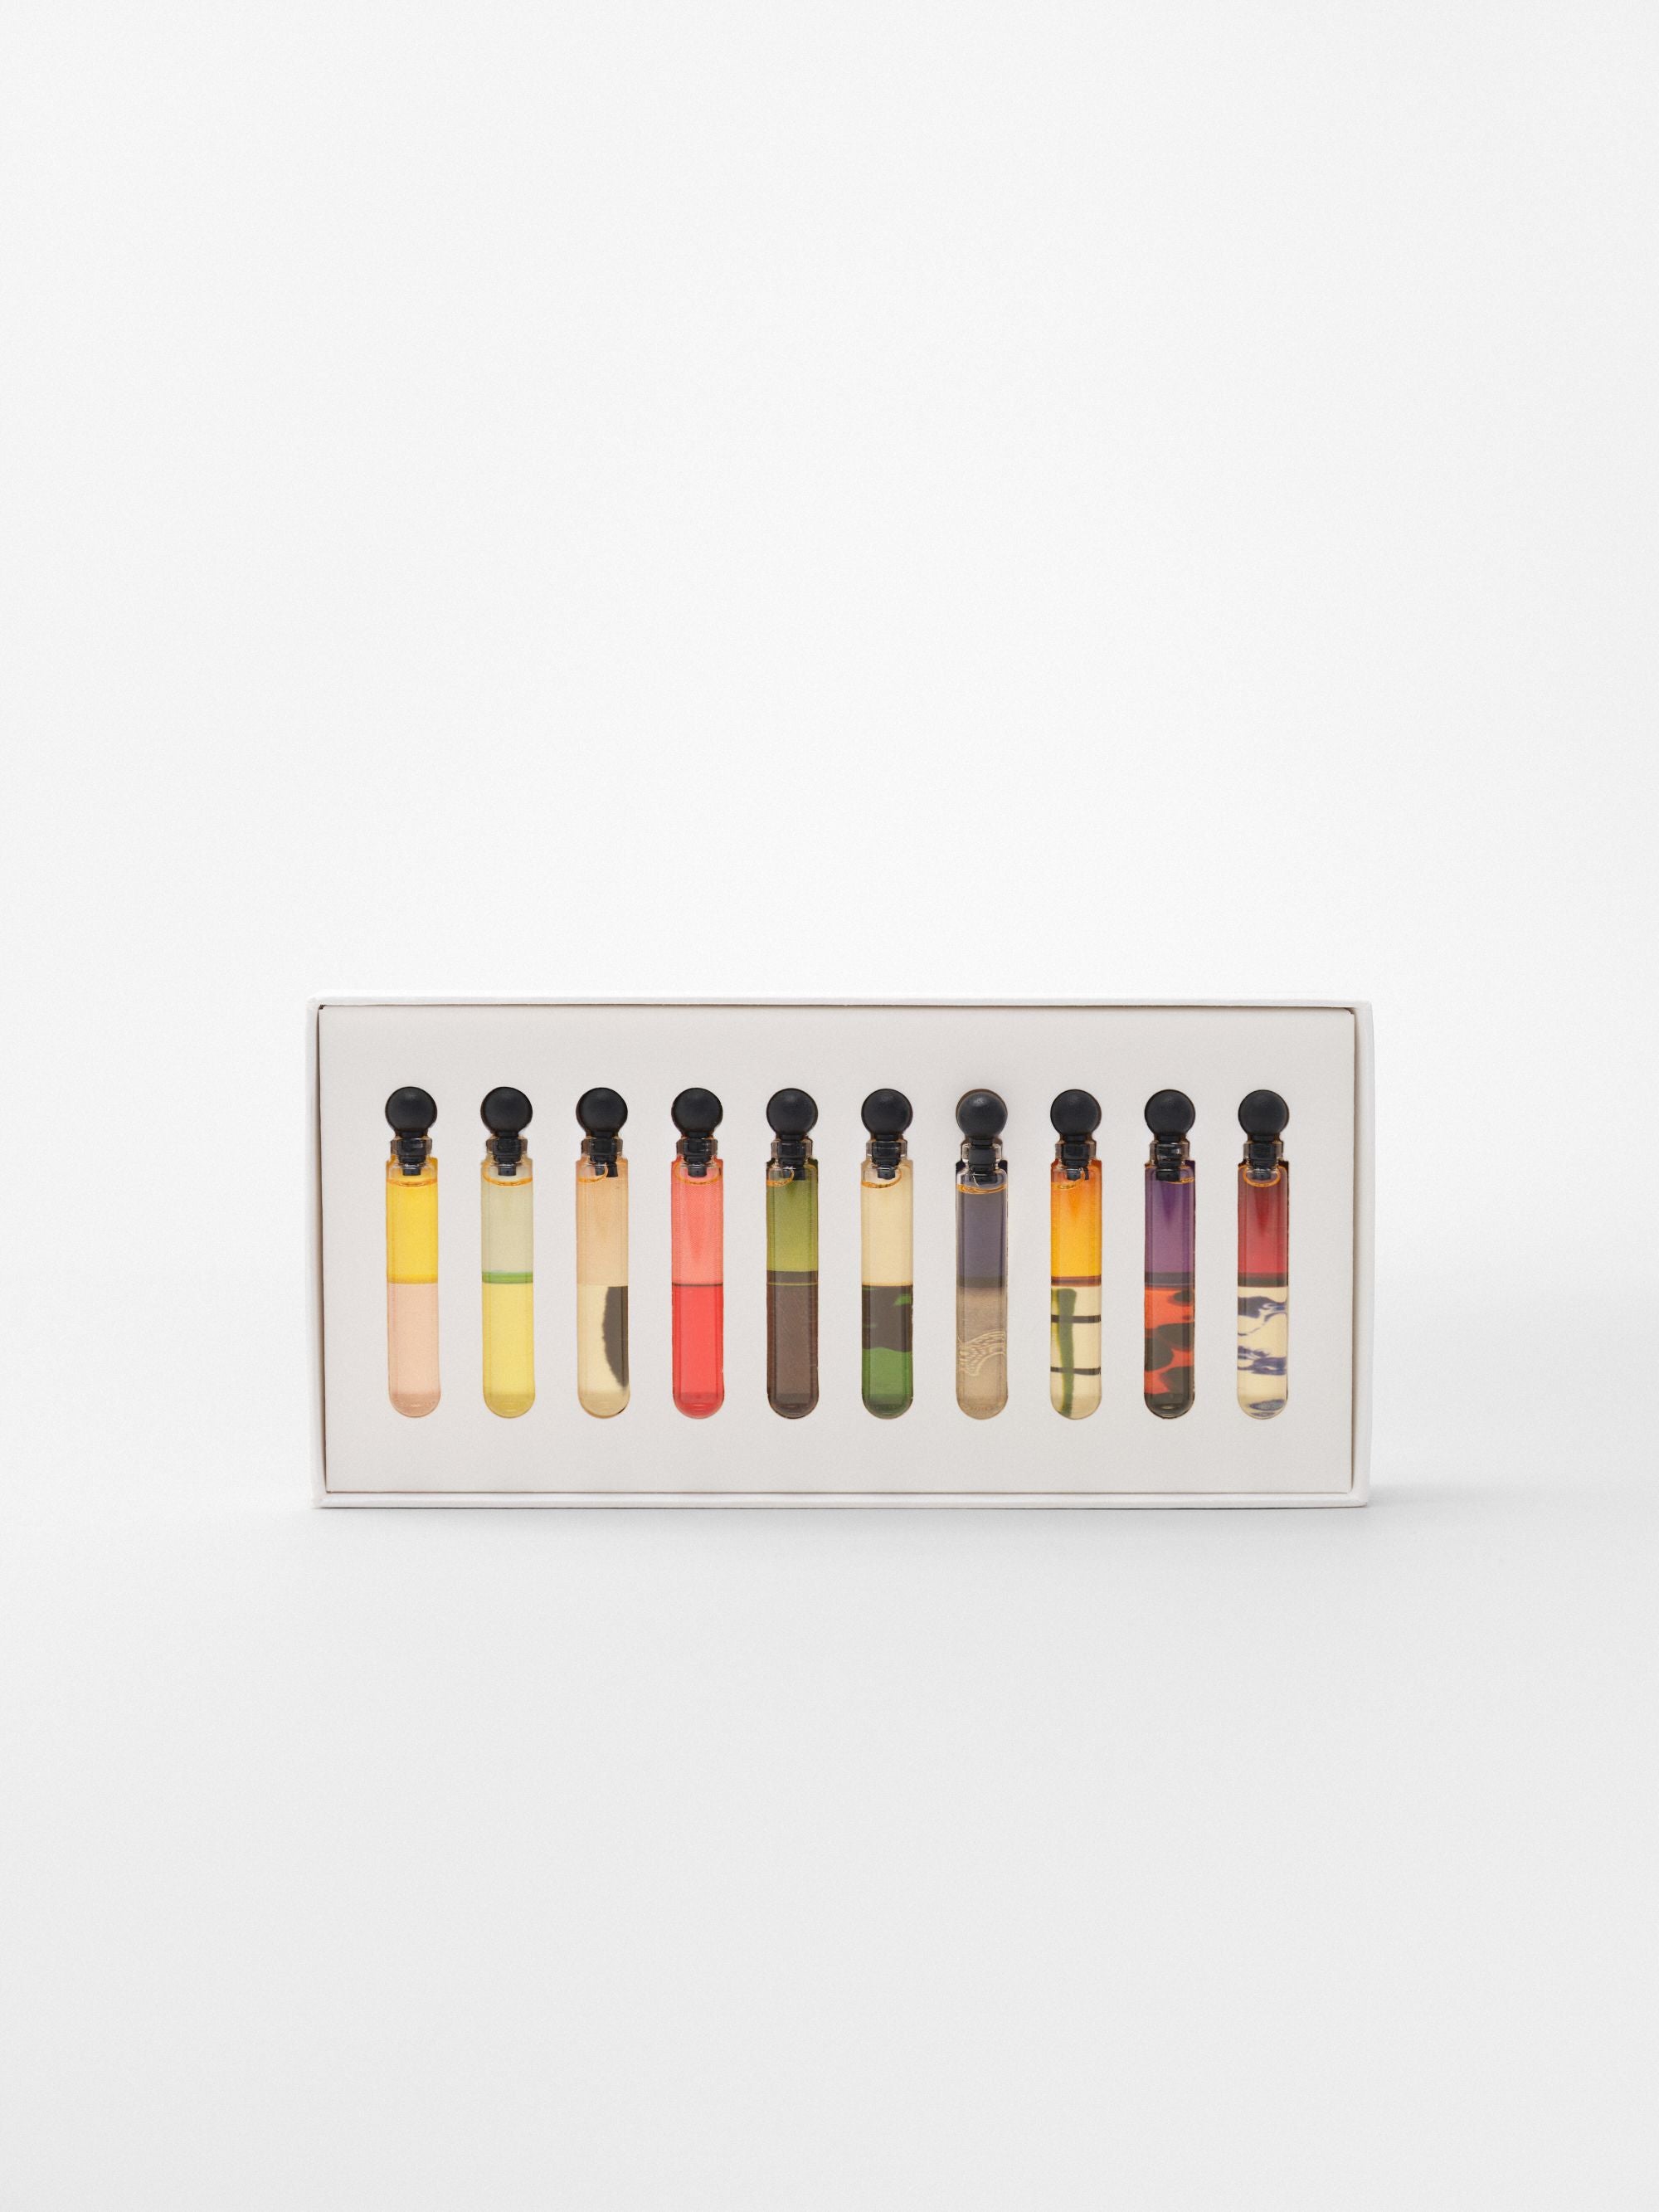 Fragrance Discovery Set Collection Modepaleis | Dries van Noten 